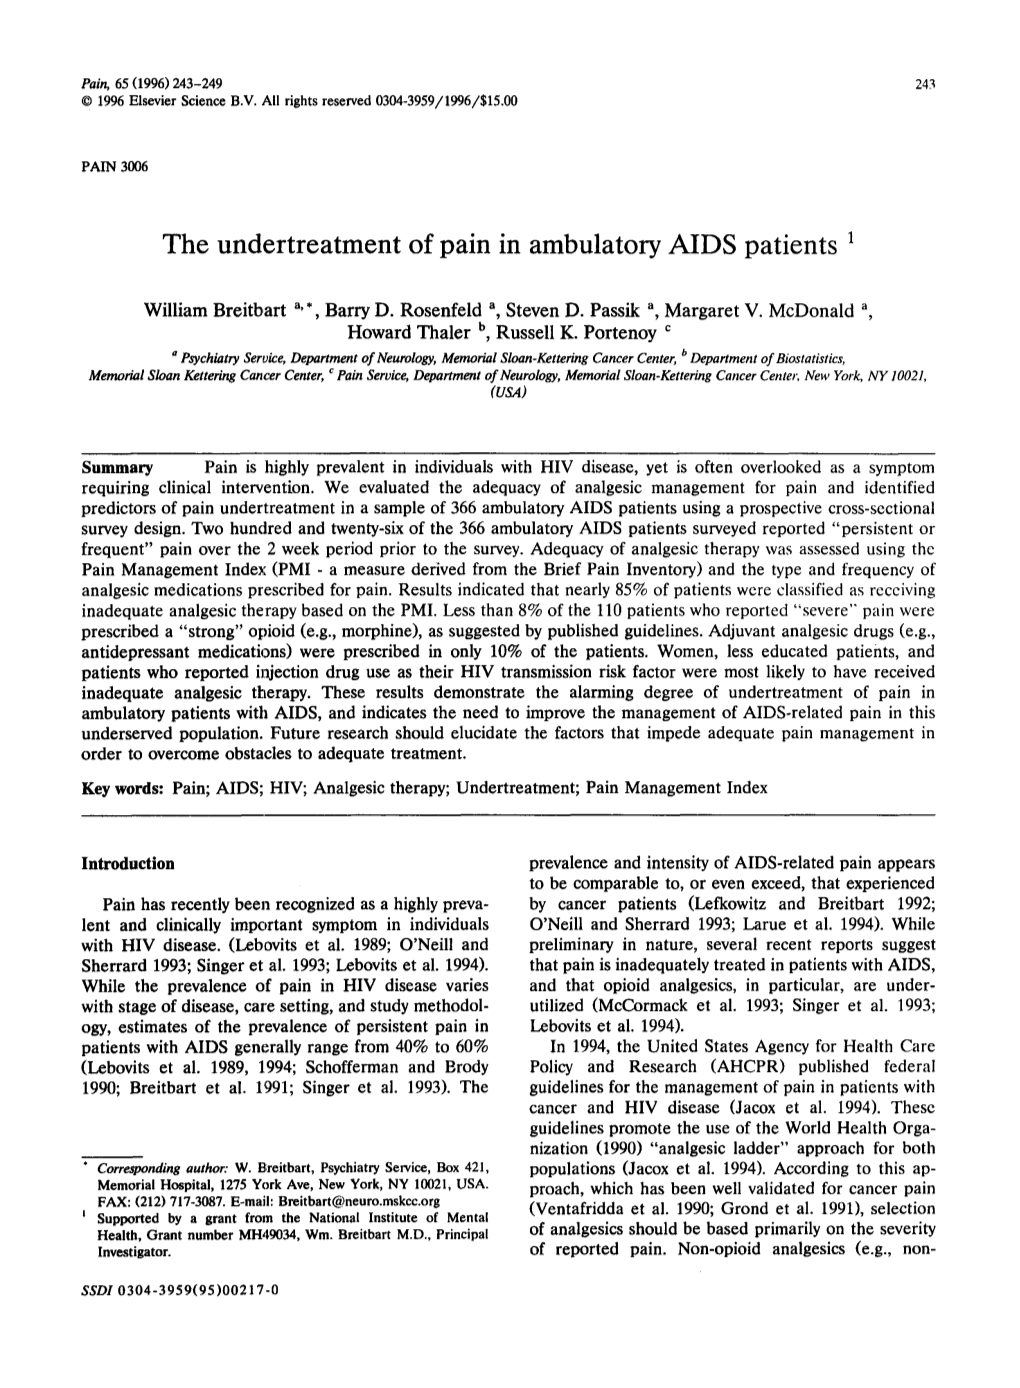 The Undertreatment of Pain in Ambulatory AIDS Patients 1